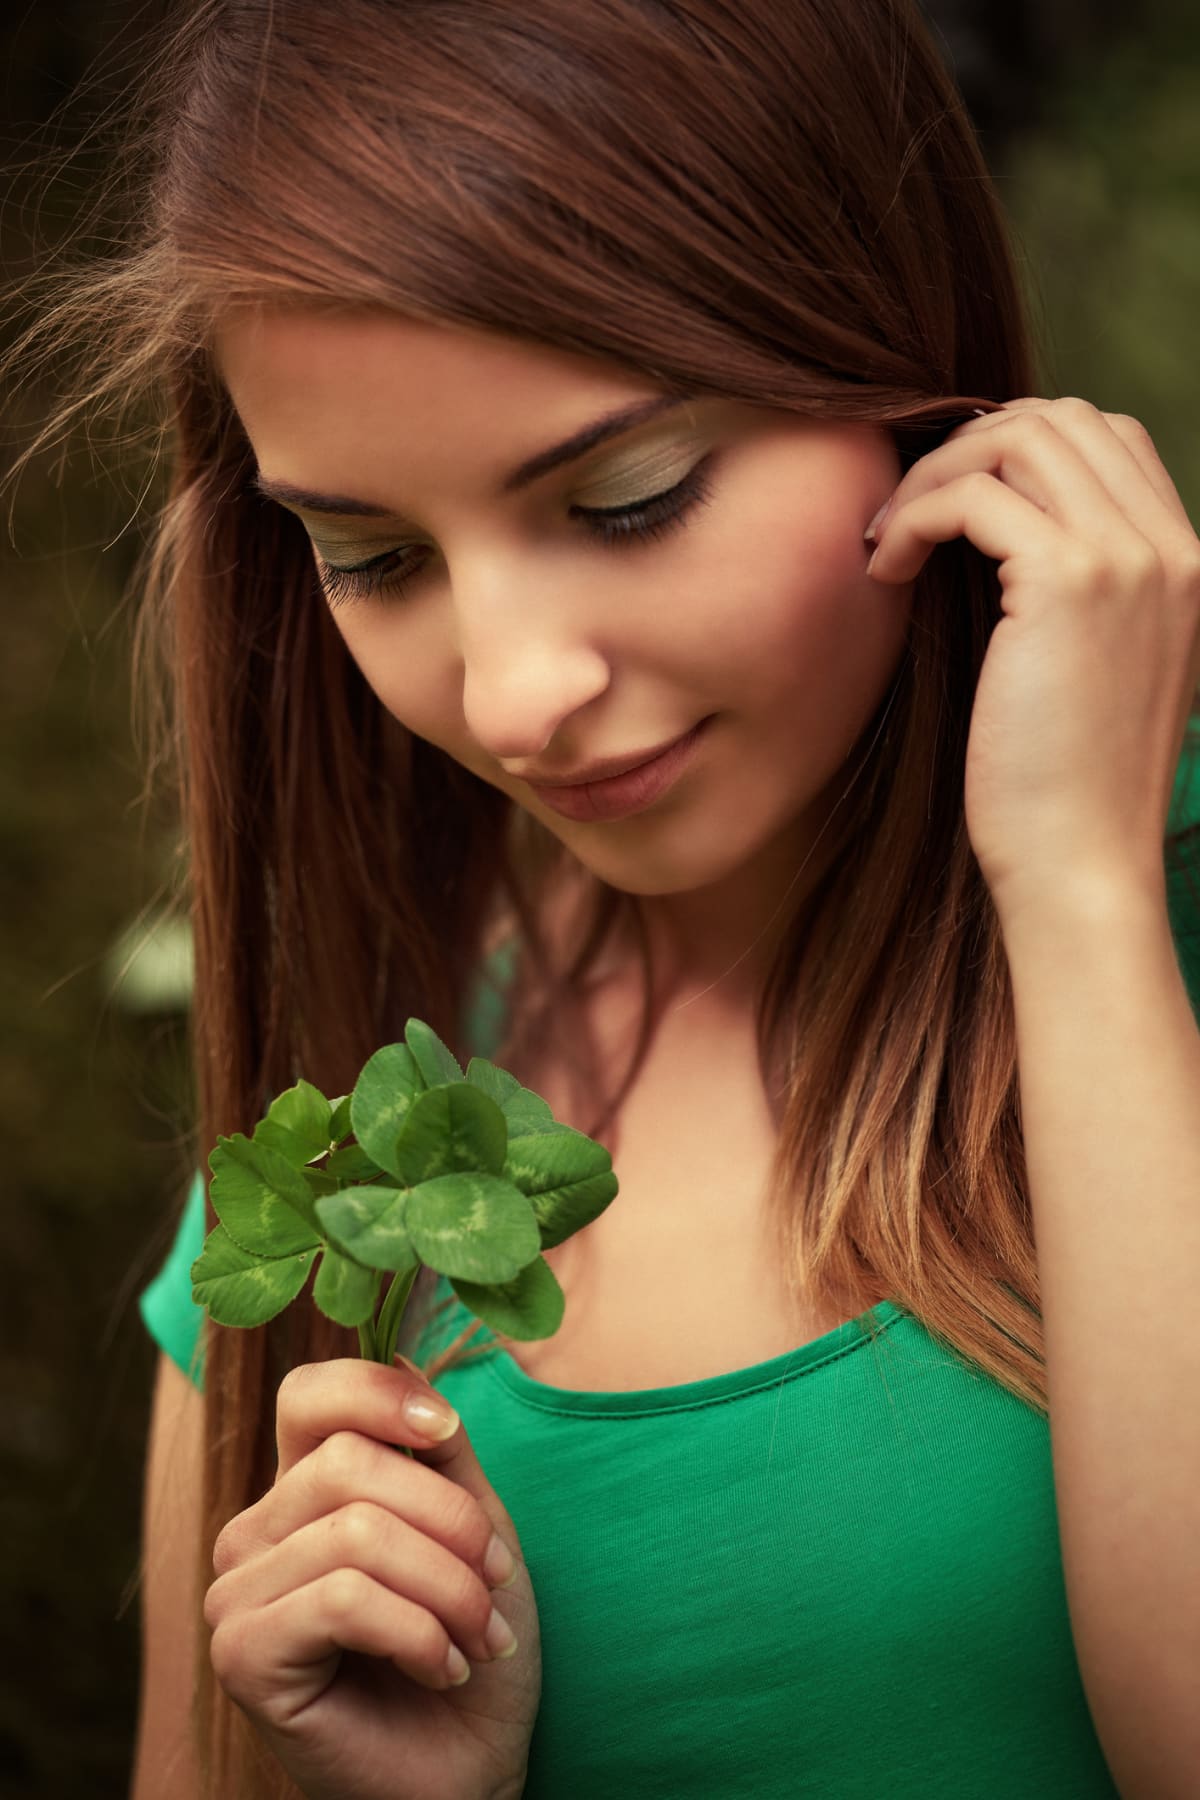 Young woman holds shamrocks as she tucks her hair behind her ear